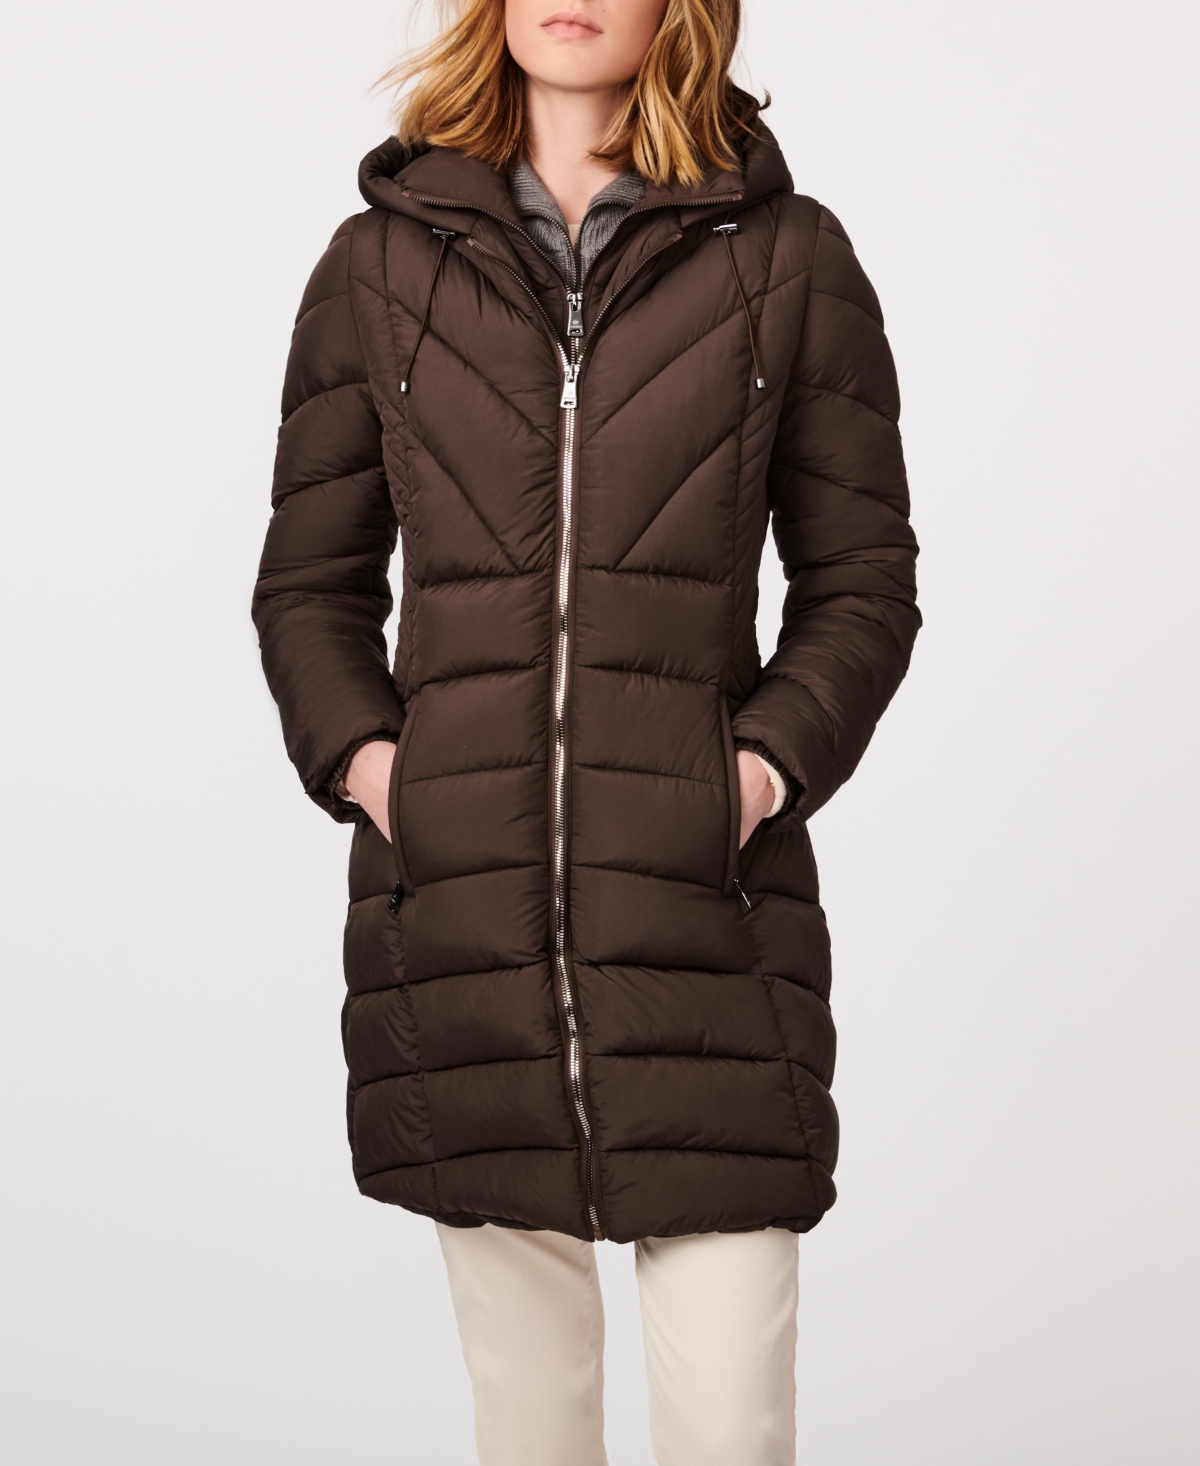 Bernardo Women's Hooded Quilted Puffer Coat with Removable Bib